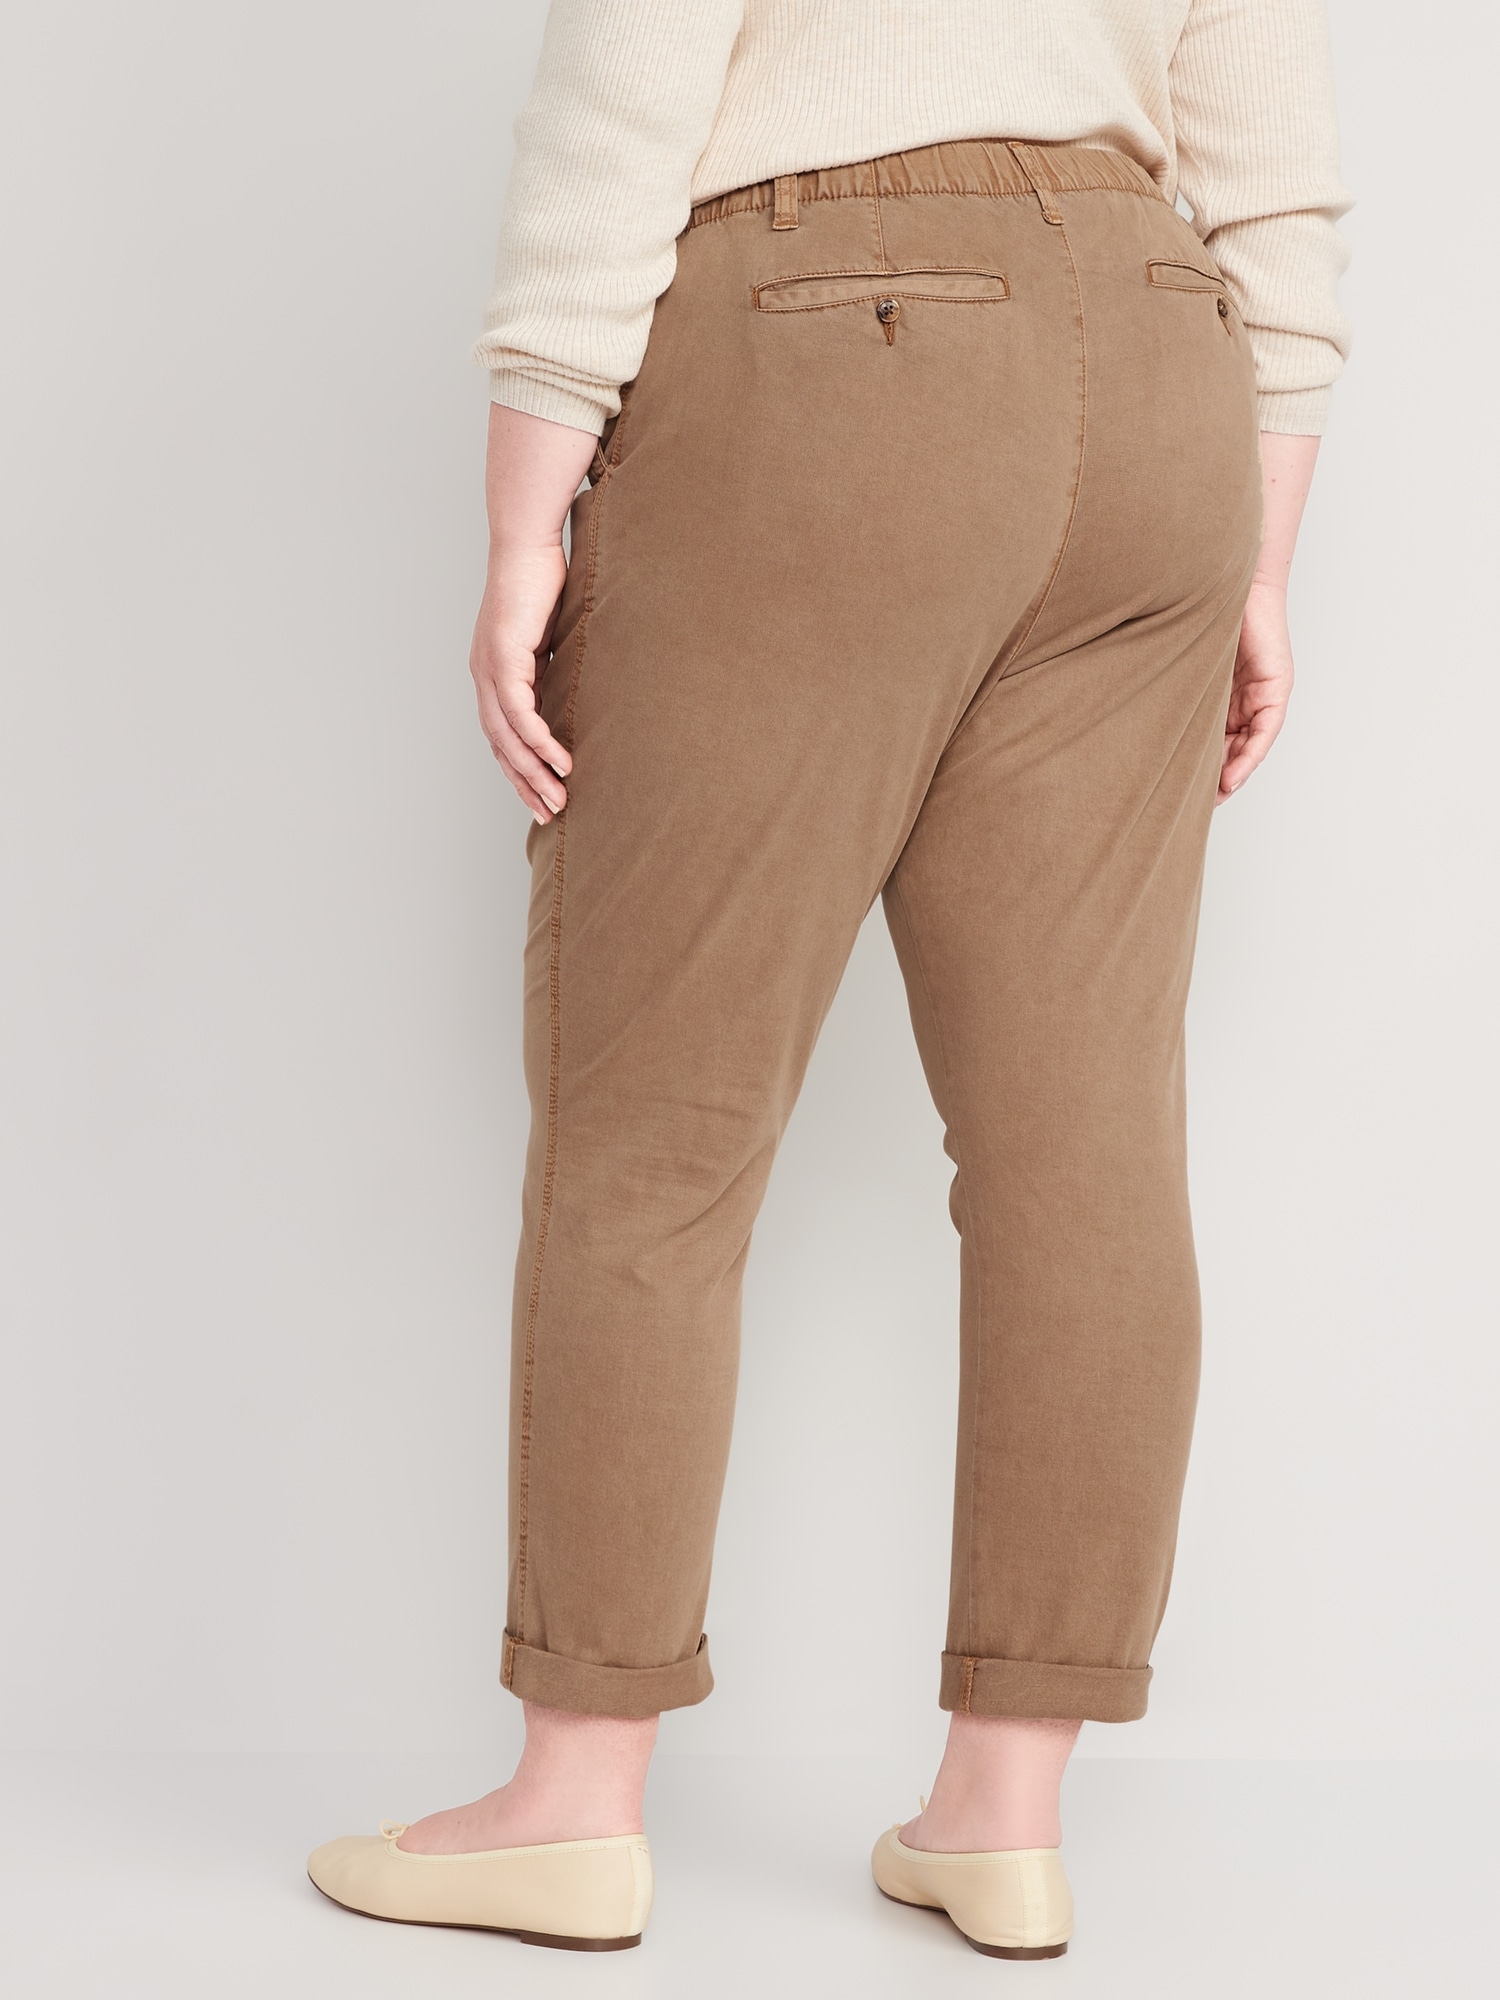 Old Navy Women's Size Large Sisal Brown High Waisted OGC Chino Pants NWT